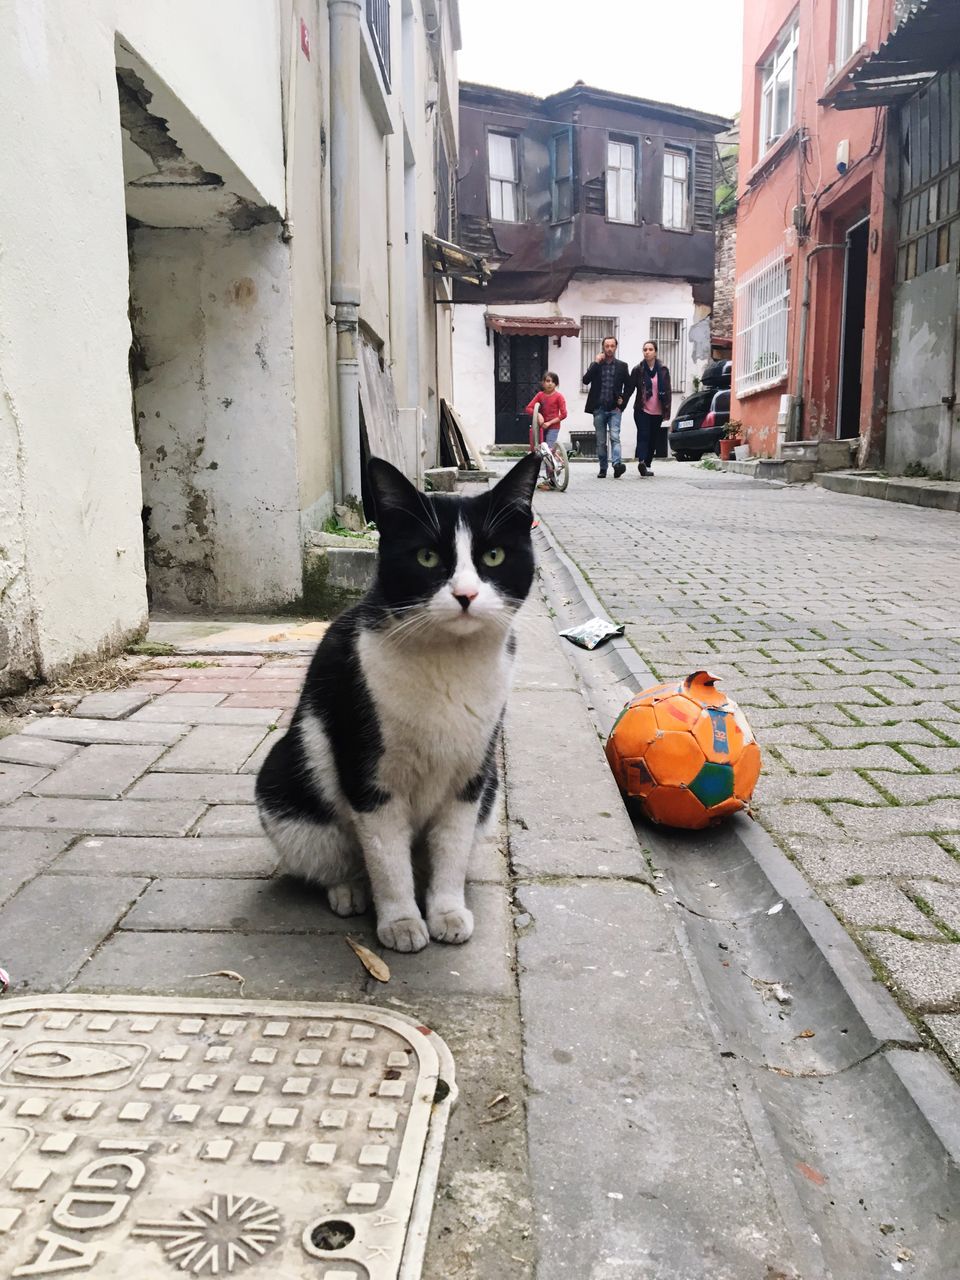 domestic cat, one animal, animal themes, pets, feline, domestic animals, mammal, building exterior, cat, outdoors, sitting, street, architecture, built structure, day, pumpkin, no people, halloween